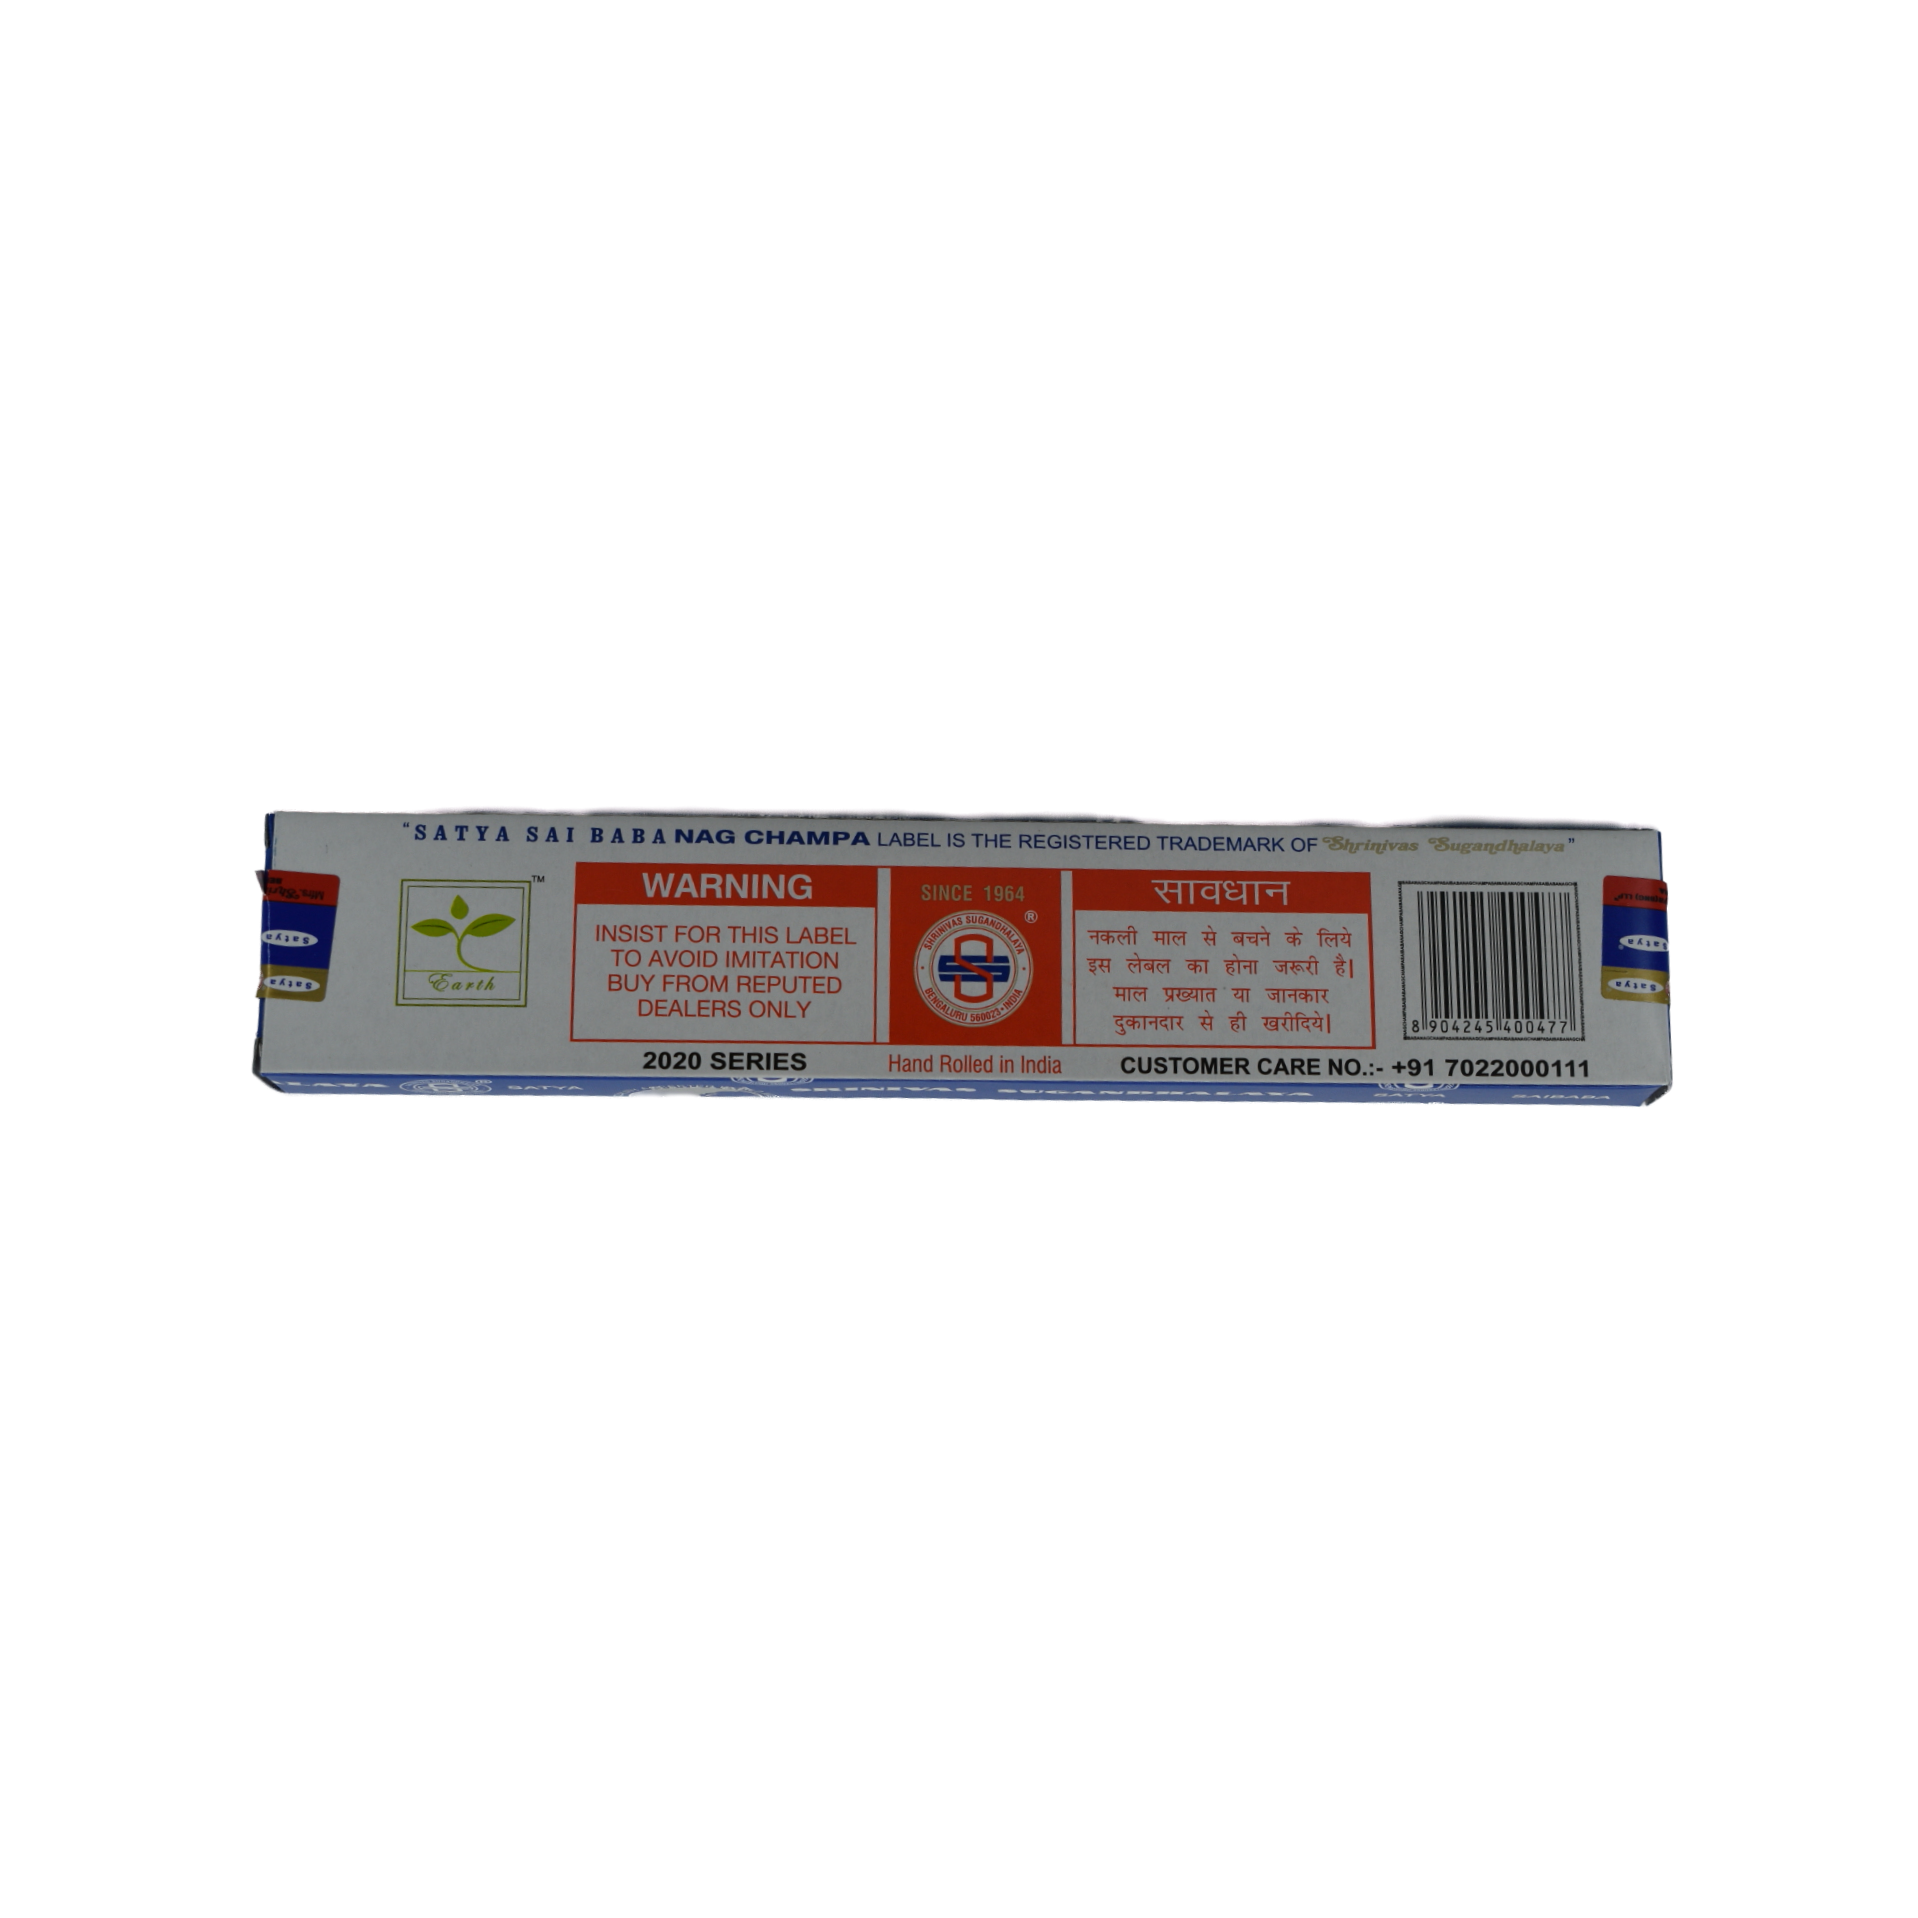 Nag Champa 15gr Sai Baba Incense Sticks back cover. The bottom of the box is white. The rectangle in the center is divided into three sections. The left section has a red banner with white lettering that says Warning. Below in red letters it say Insist for this label to avoid imitation buy from reputed dealers only. The center section has a red box with a white circle in the middle with the company trademark logo. Above the circle title say Since 1964.